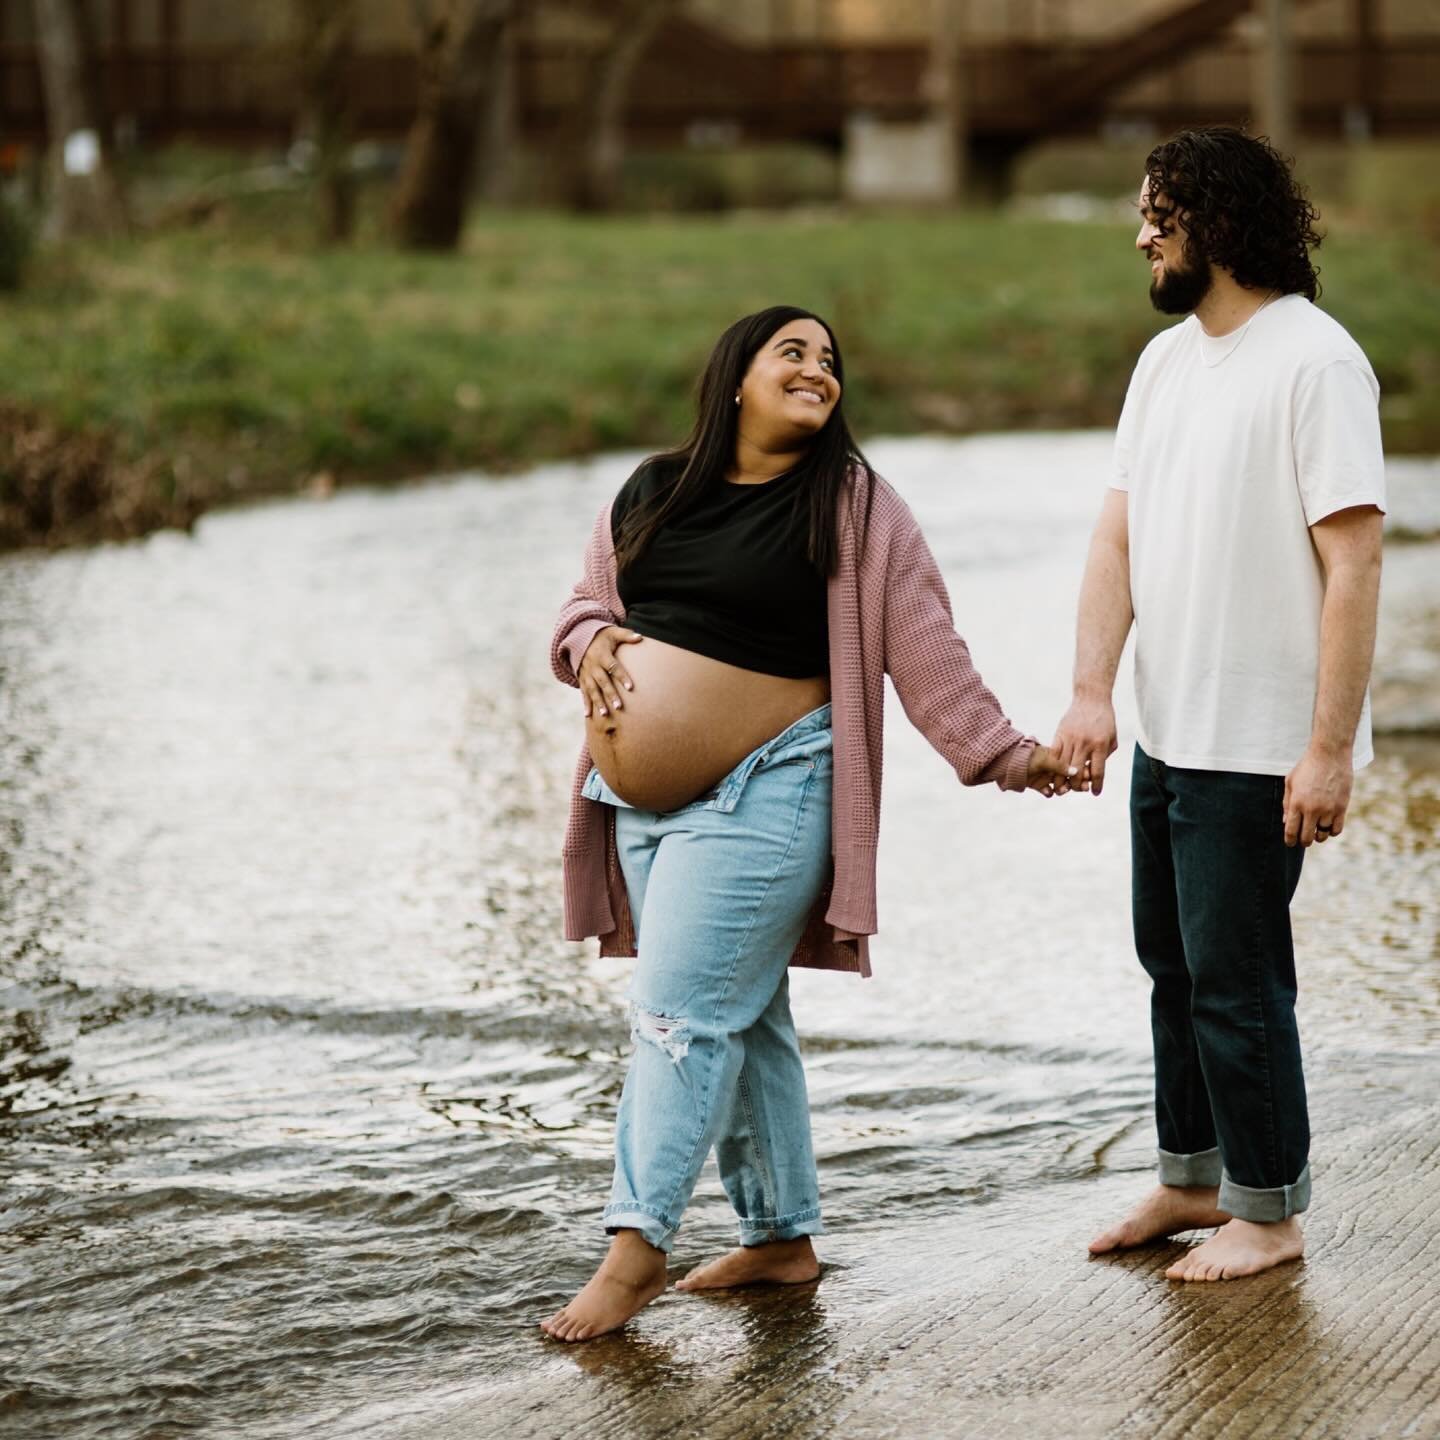 Just a few moments from the sweetest maternity session with @j_squibs_ and @kemishantonio ✨